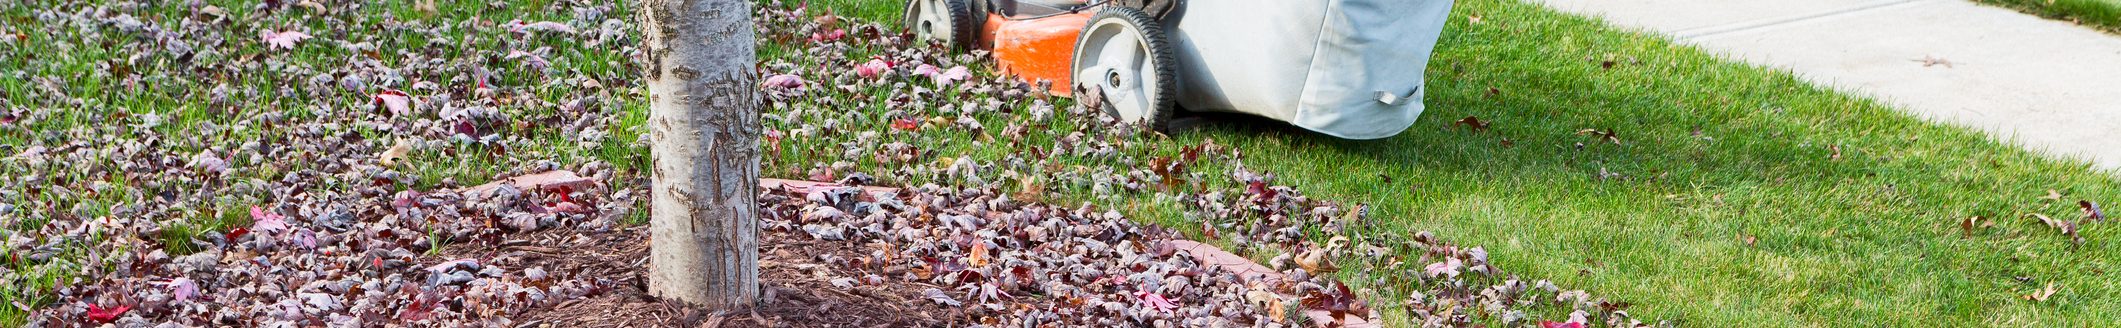 Neatening up the lawn in autumn or fall using a lawnmower to cut and bag the grass and dead leaves under trees alongside the road (Photo: iStock - Ozgur Coskun)